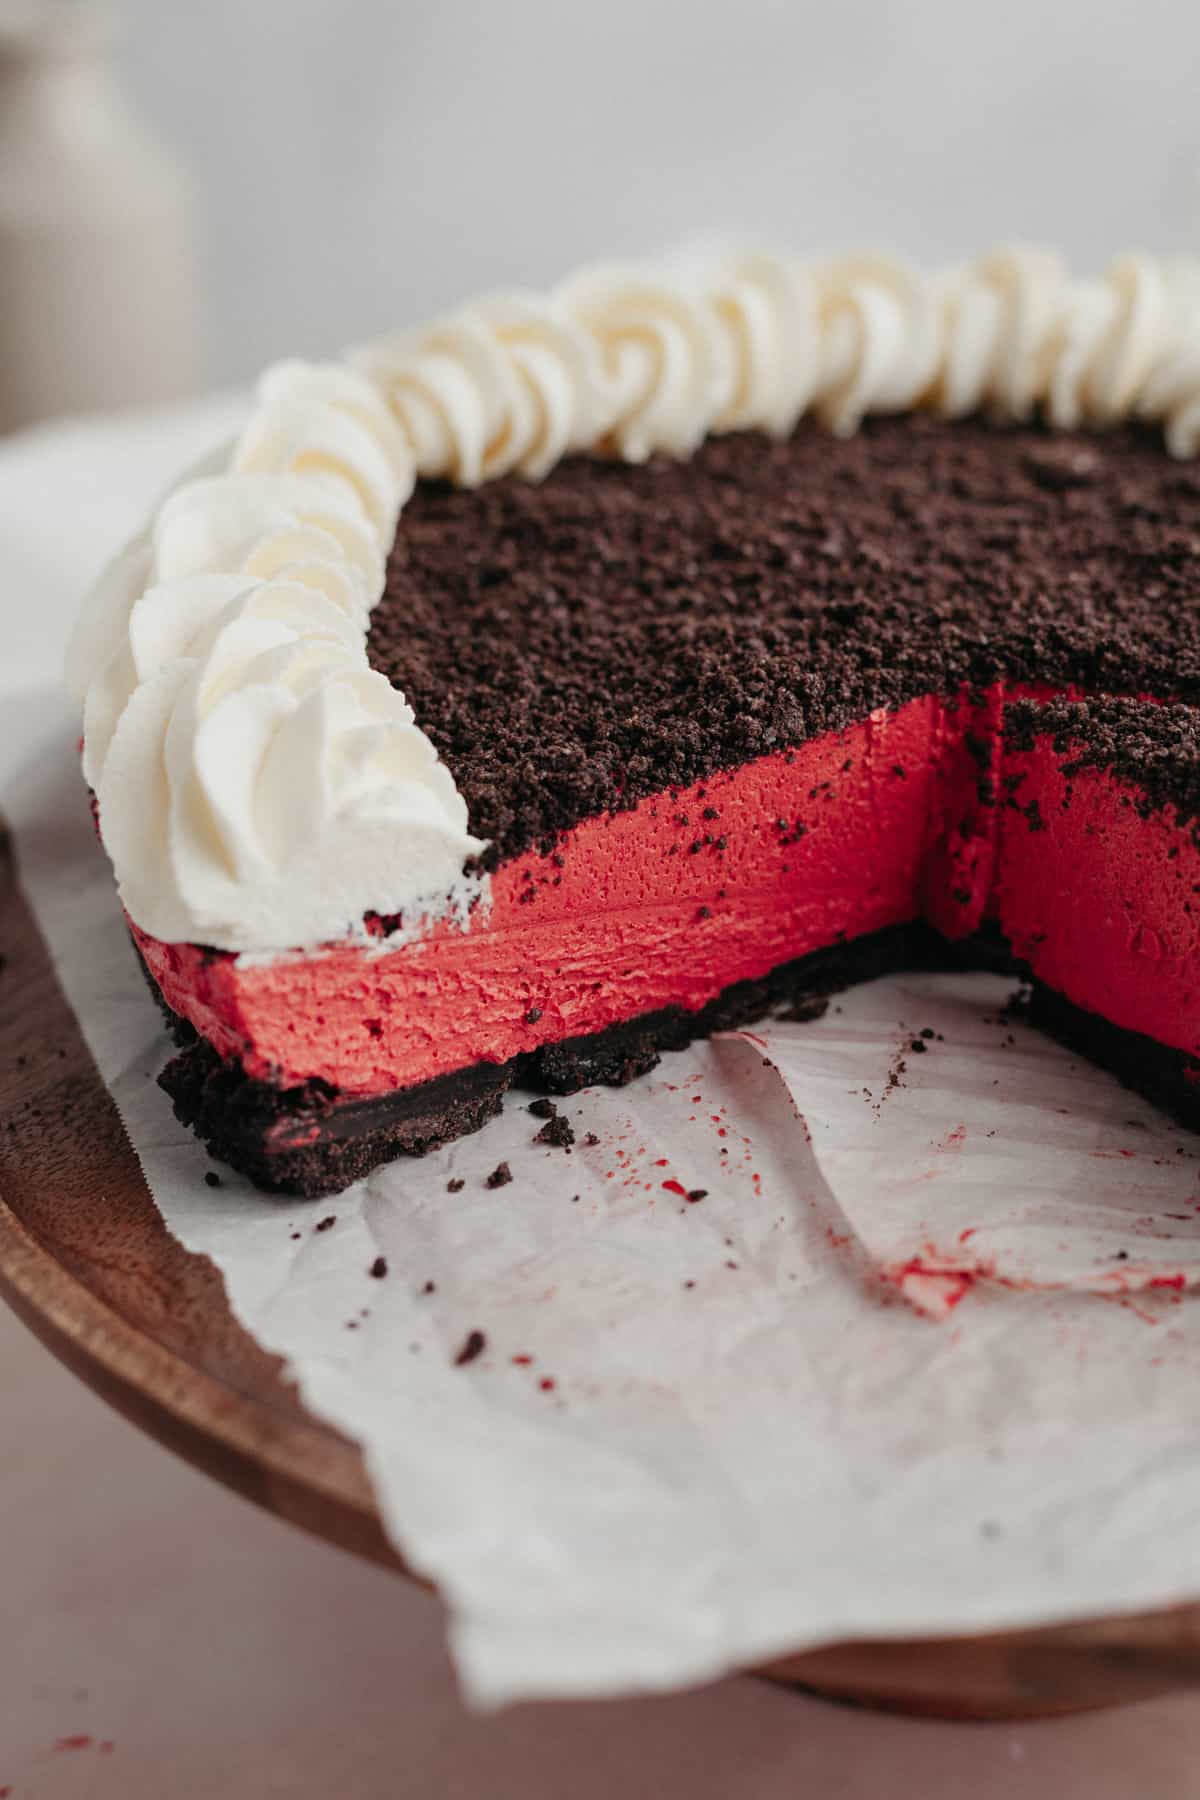 A close up of an Oreo red velvet cheesecake that has a few slices taken out of it.